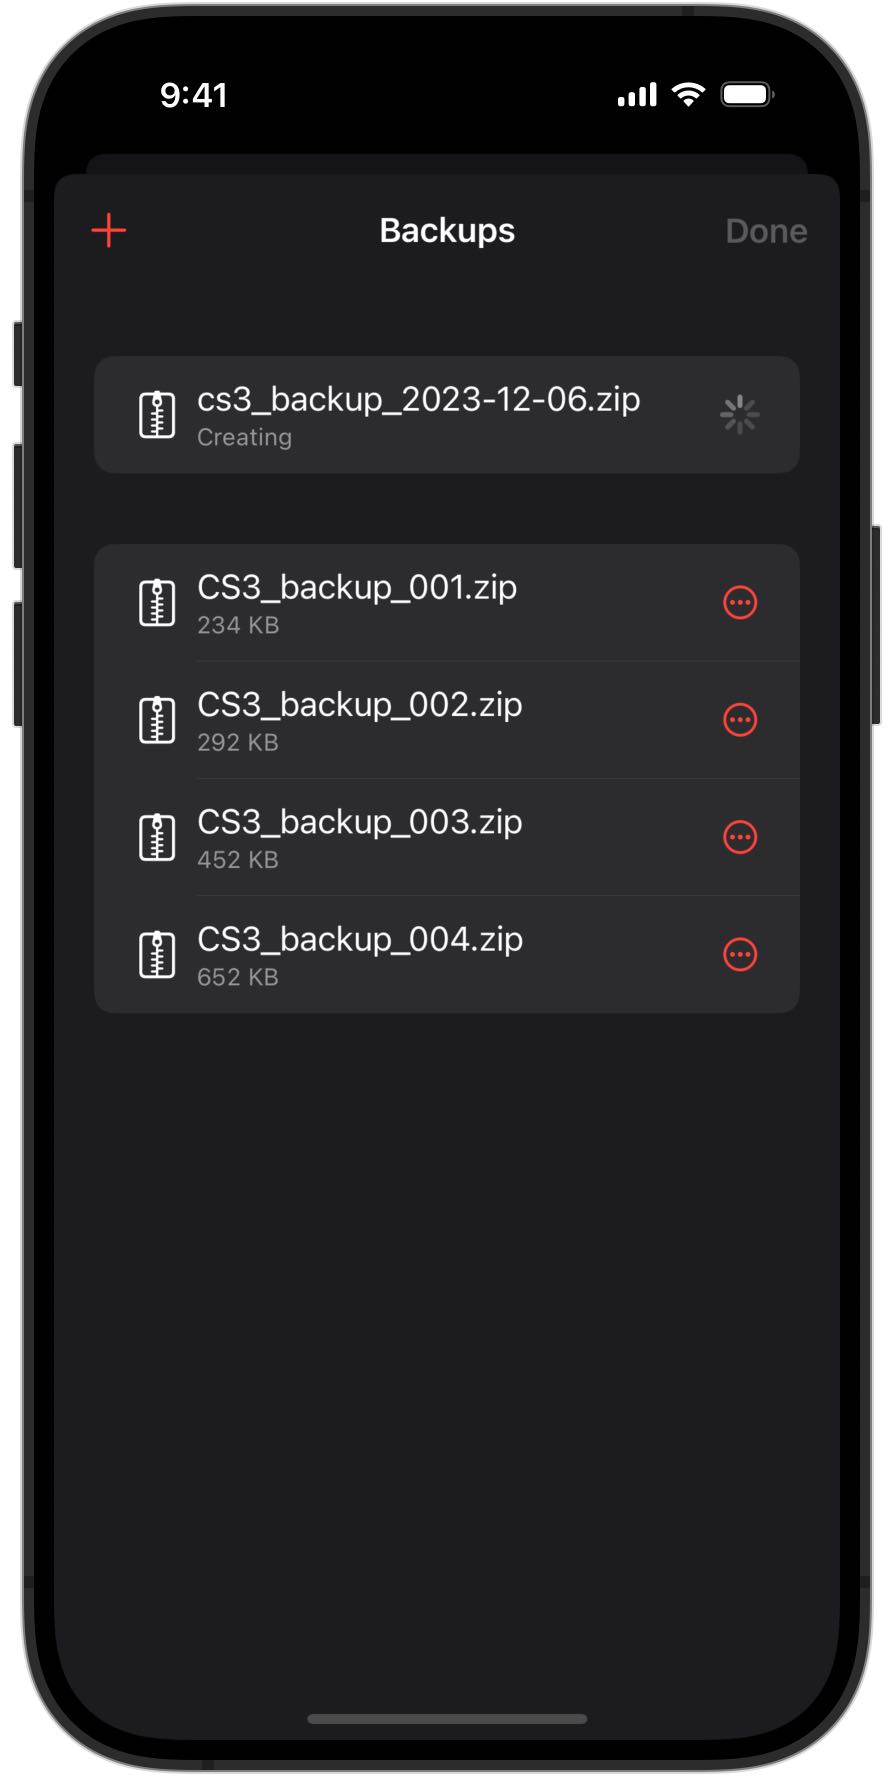 Screenshot of an iPhone creating a backup in RailControl Pro